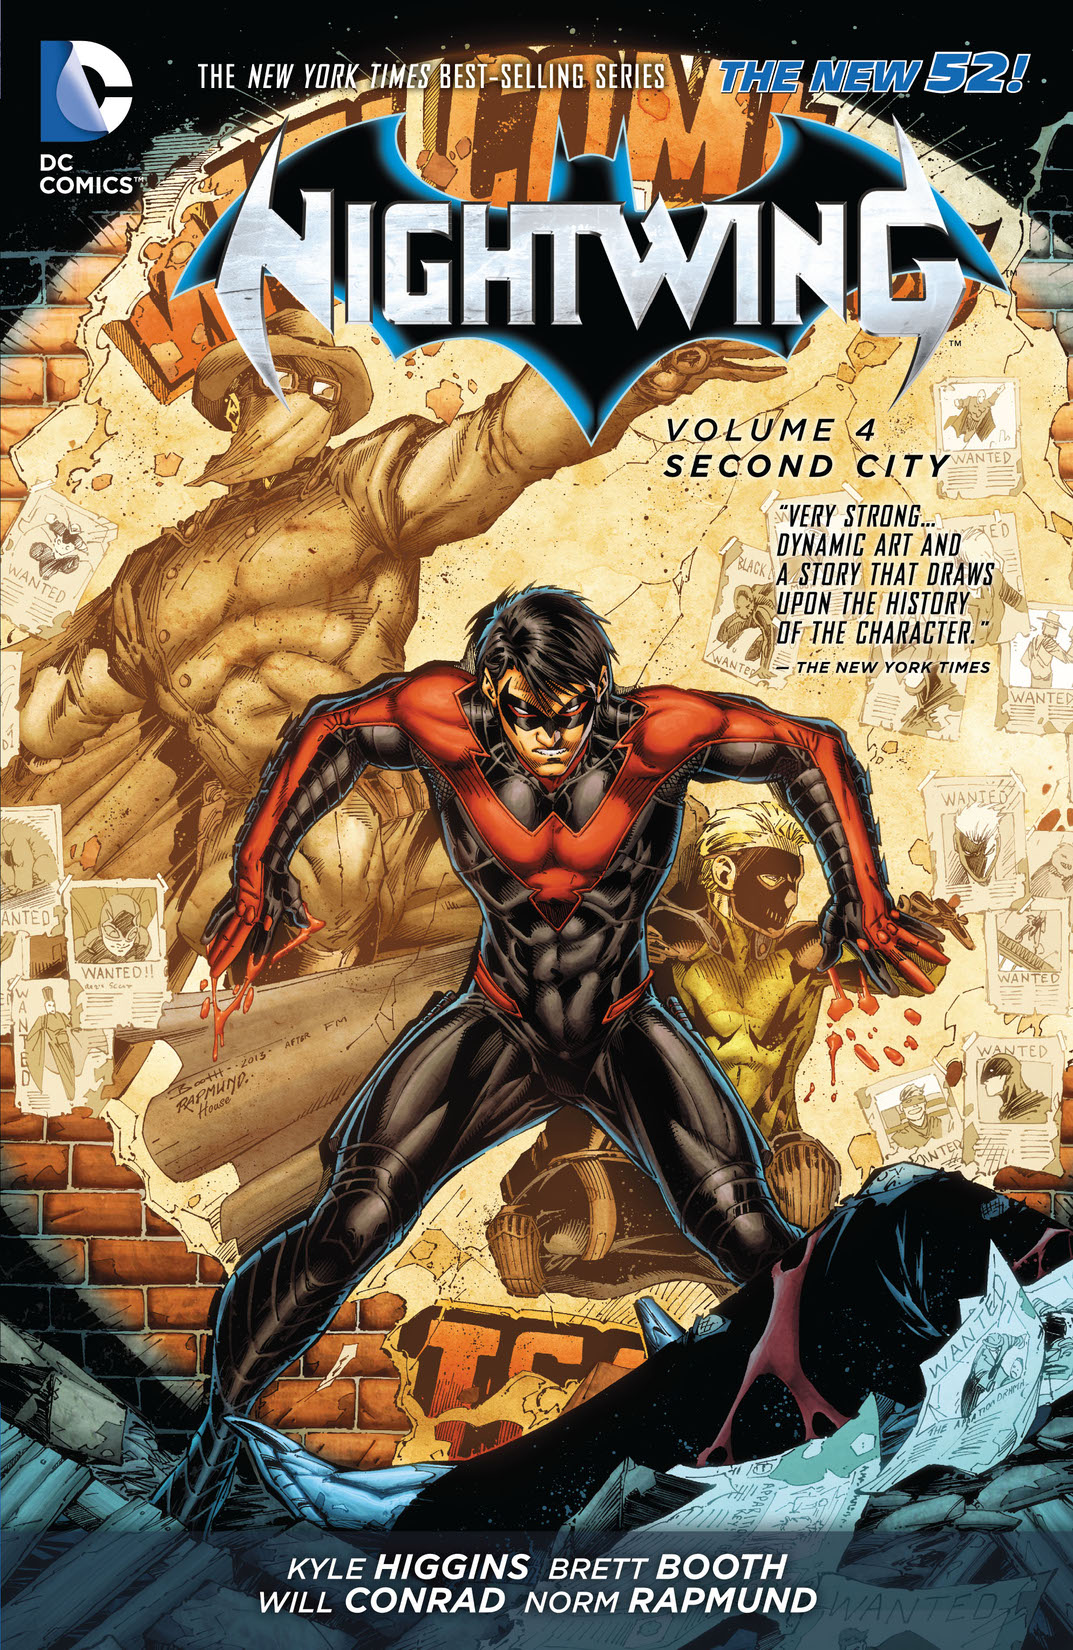 Nightwing Vol. 4: Second City preview images